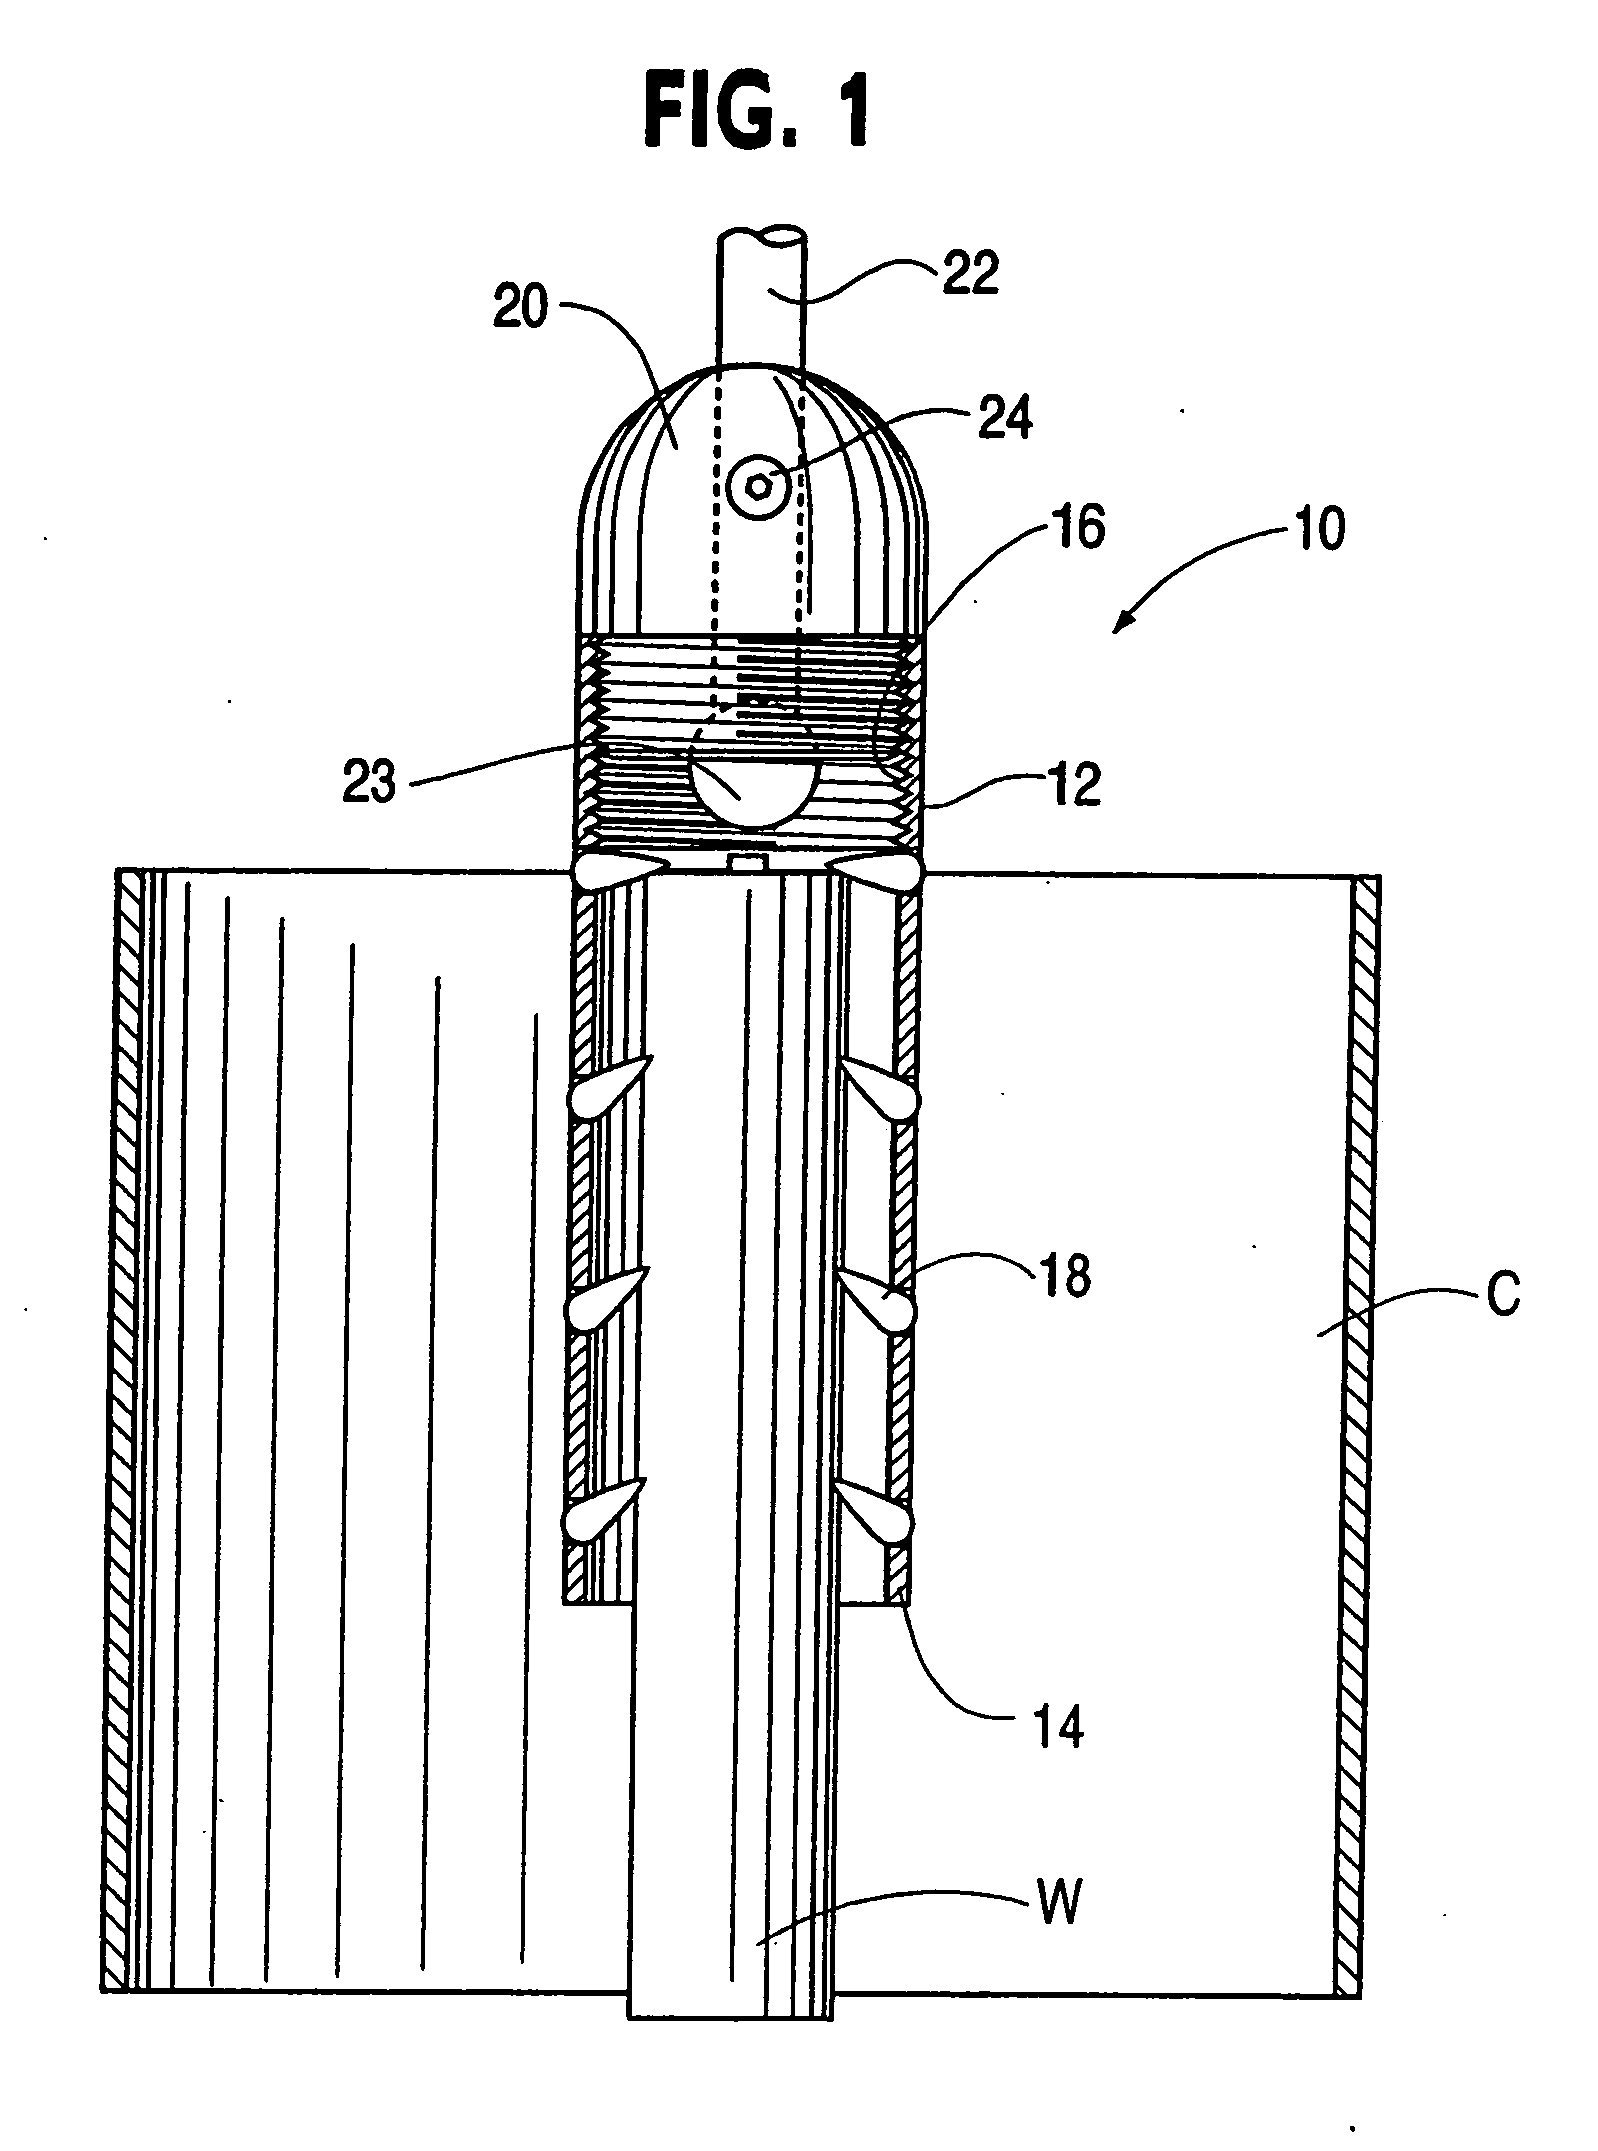 Cable clamping apparatus and method